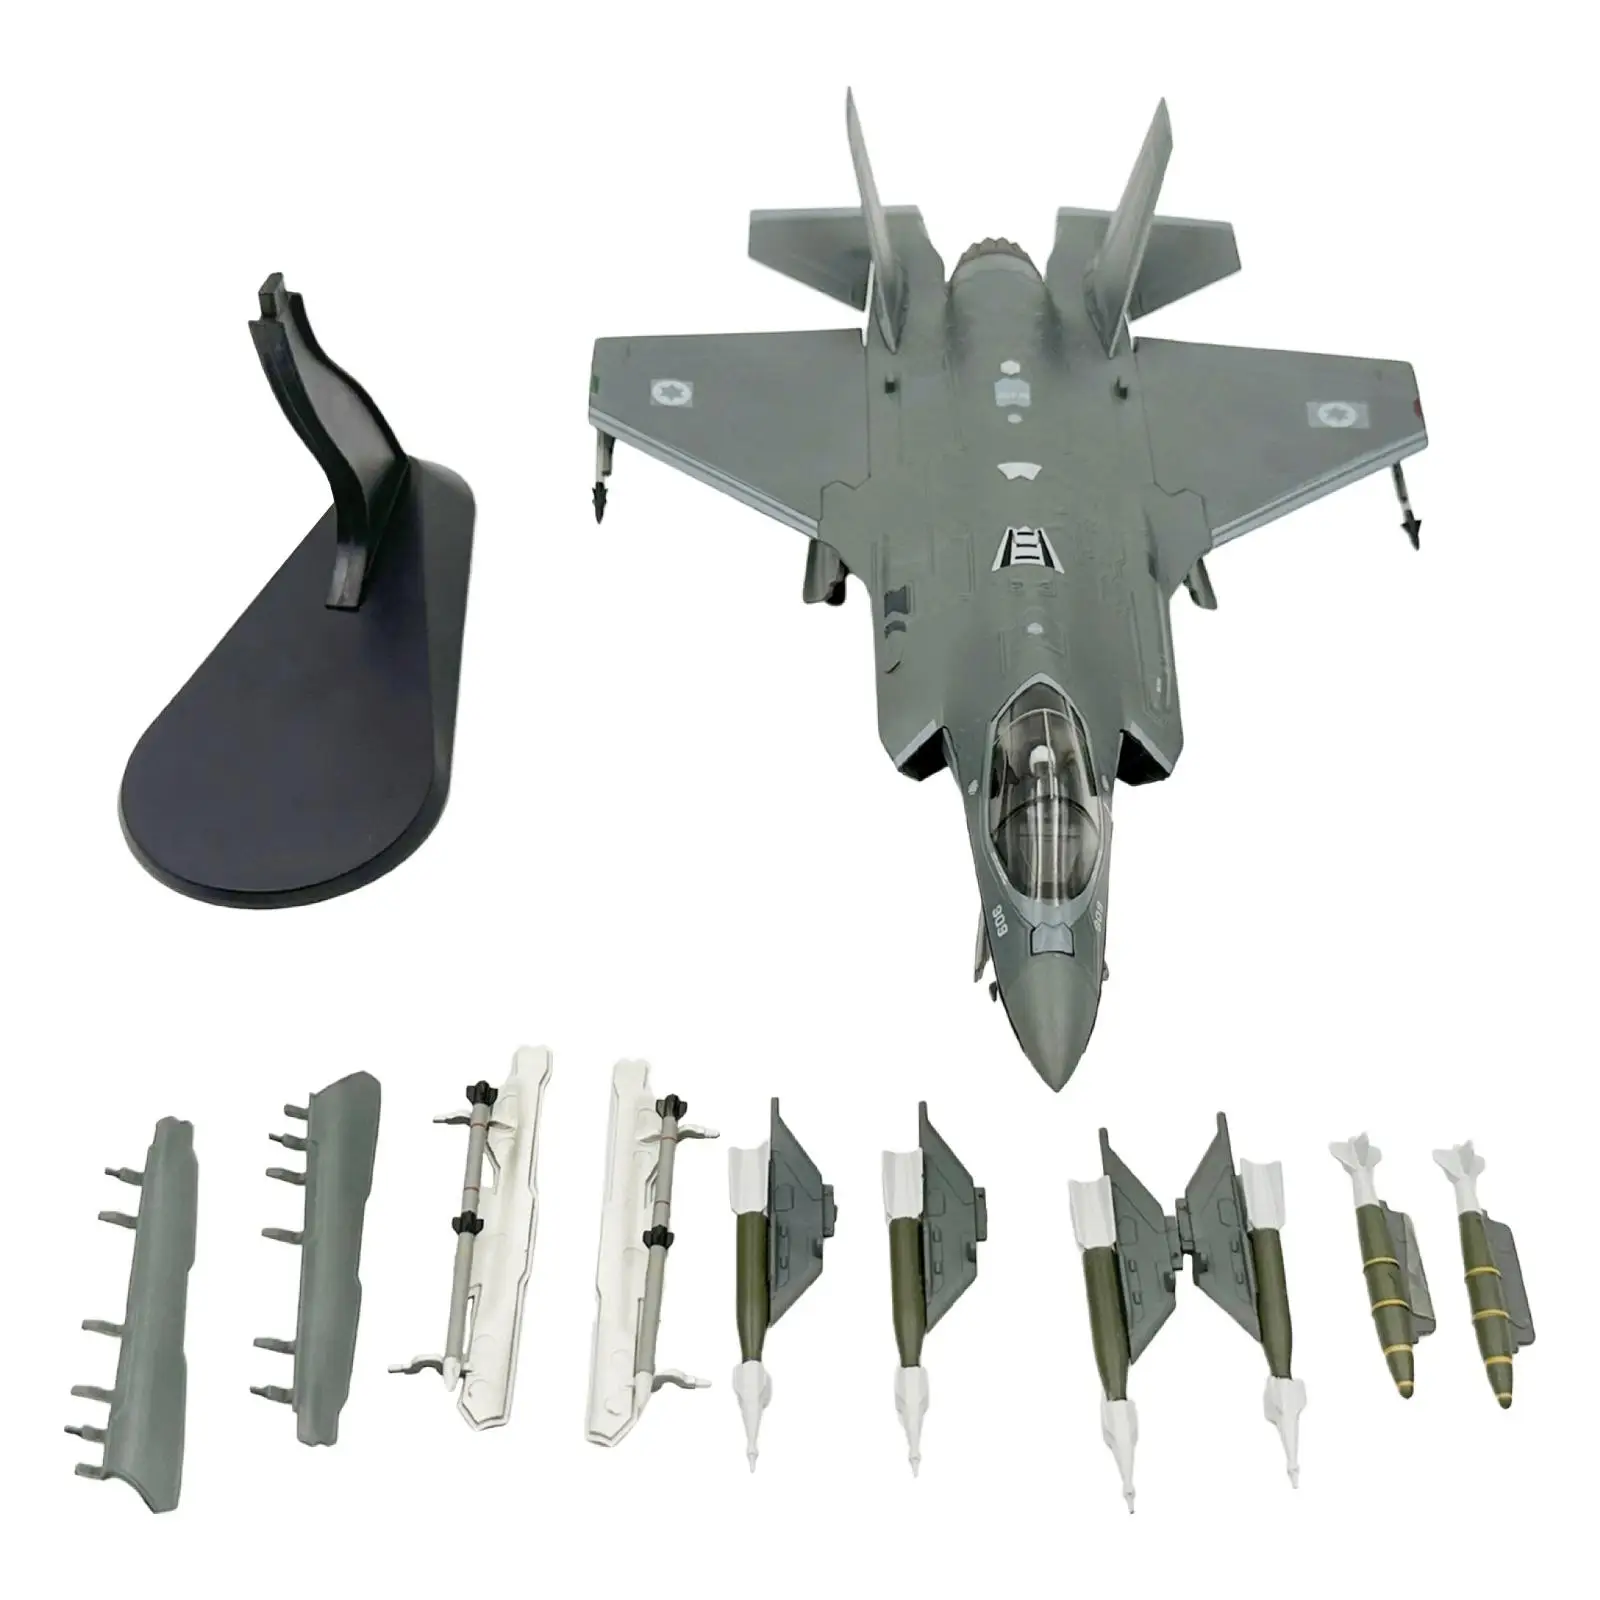 

1:72 Scale F-35i Souvenir Display Model Home Decor Detachable Tabletop Decor fighter Model for Collection Gift Ornament